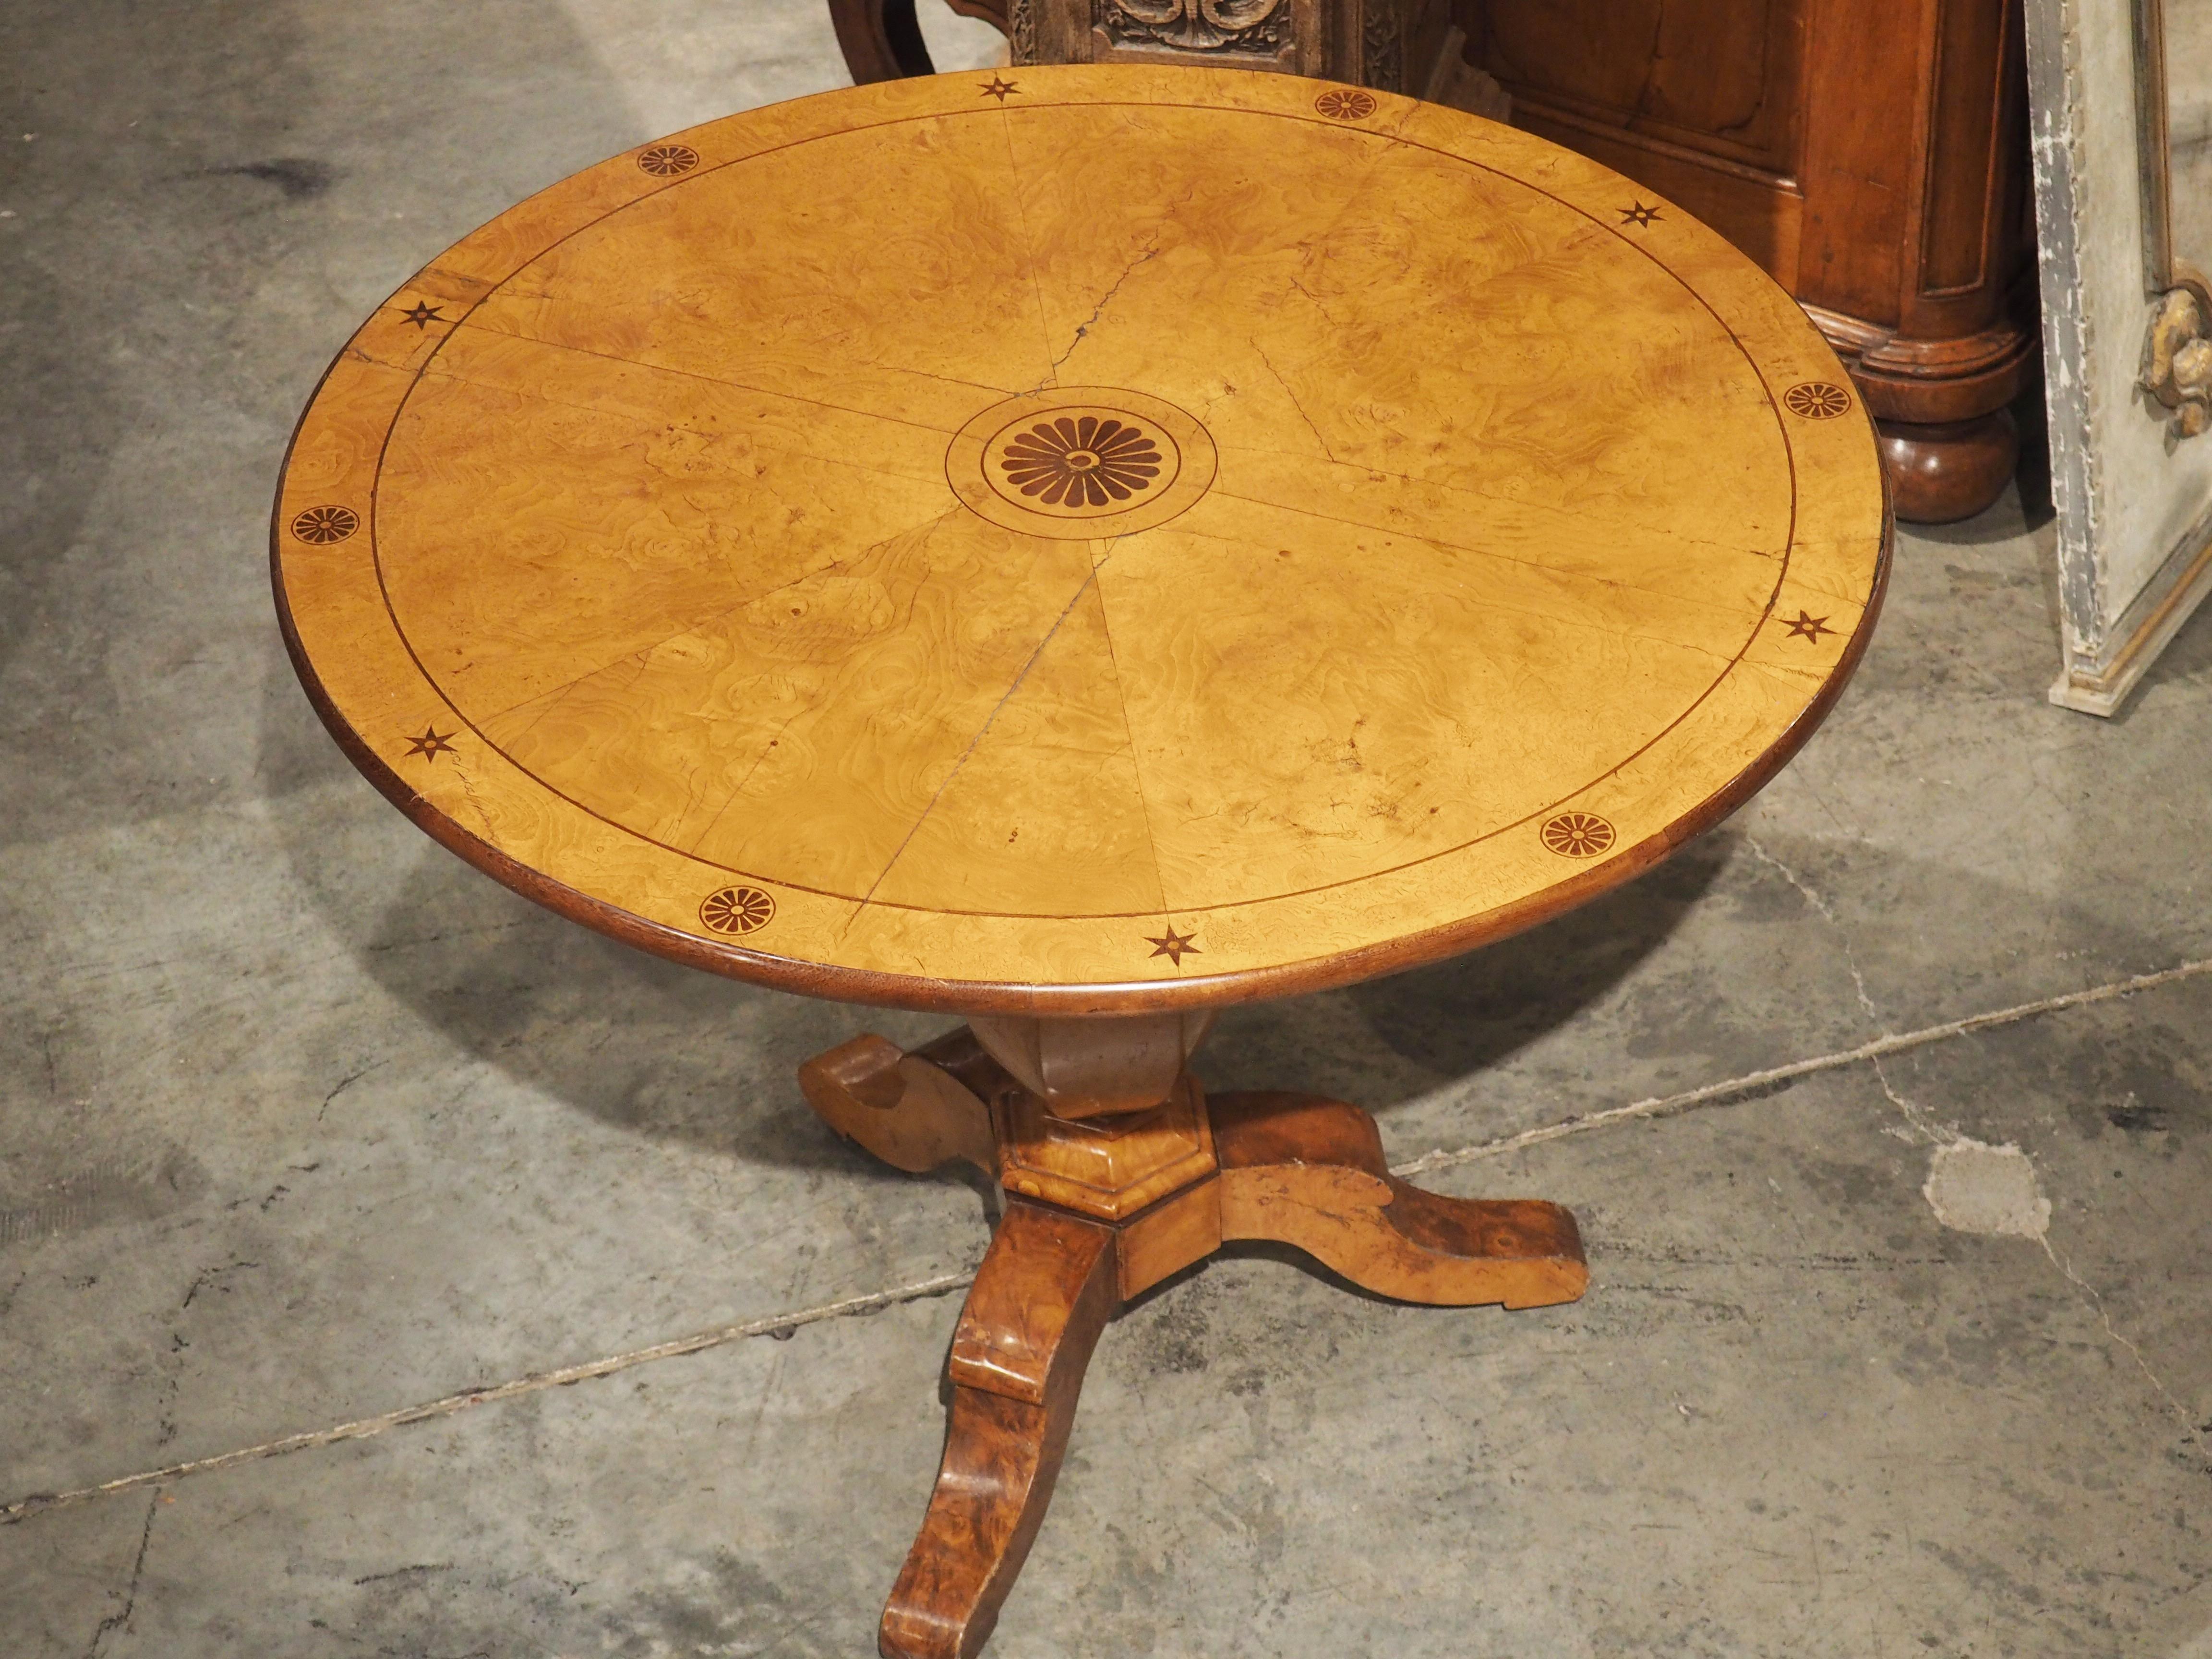 Hand-carved circa 1830, during the Louis Philippe period, this tilt-top table from France has a gorgeous light brown tone with yellow accents that is typical of the lemonwood tree. The wood, which was initially imported from Central America, has